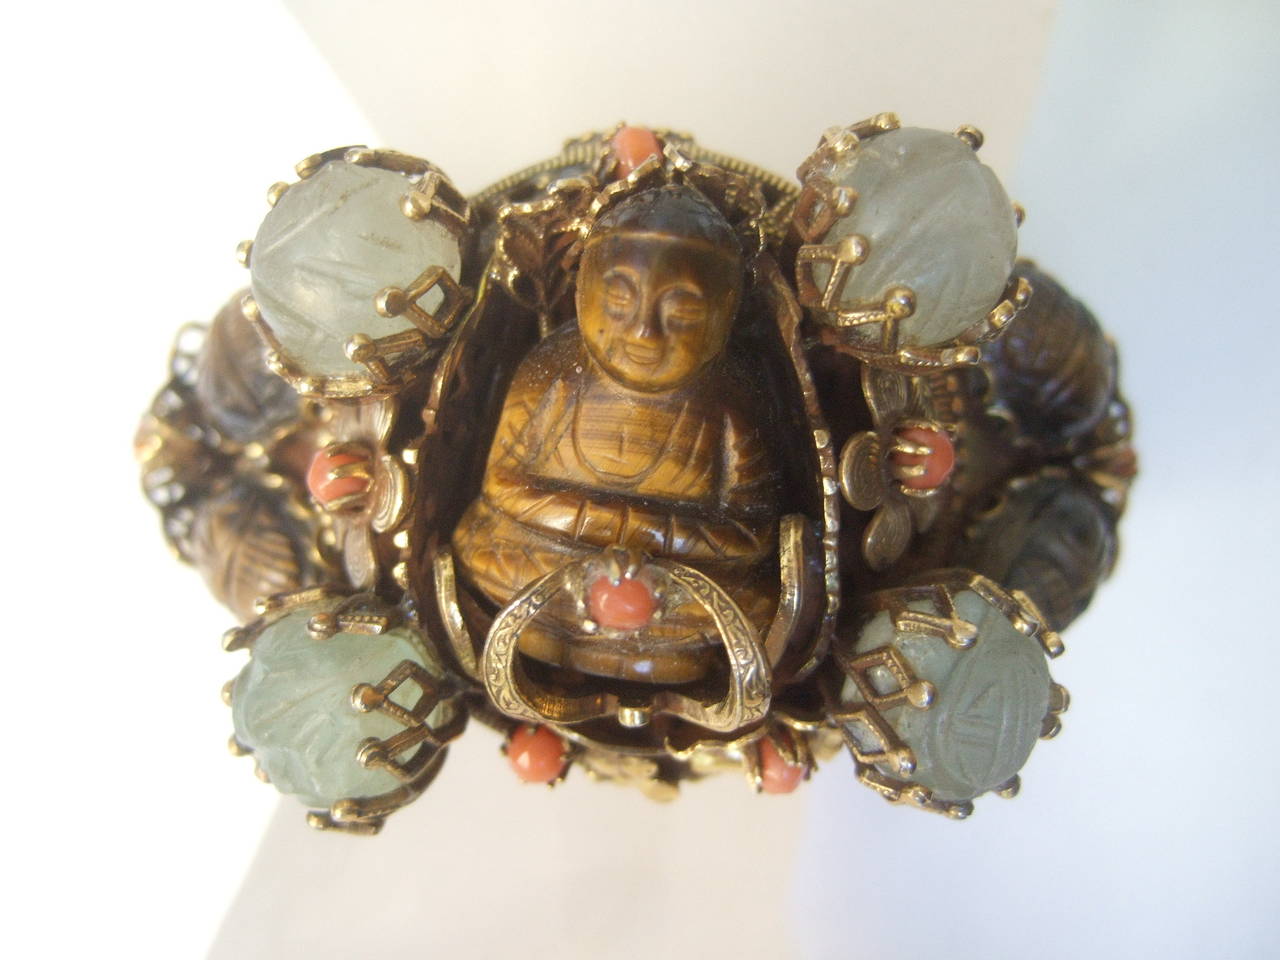 Exotic carved tiger eye jeweled Buddha beetle bracelet  
The unique Asian style gilt cuff bracelet is adorned with 
a semi precious tiger eye carved Buddha figure
at the center 

The Buddha figure is surrounded by two carved 
tiger eye beetles